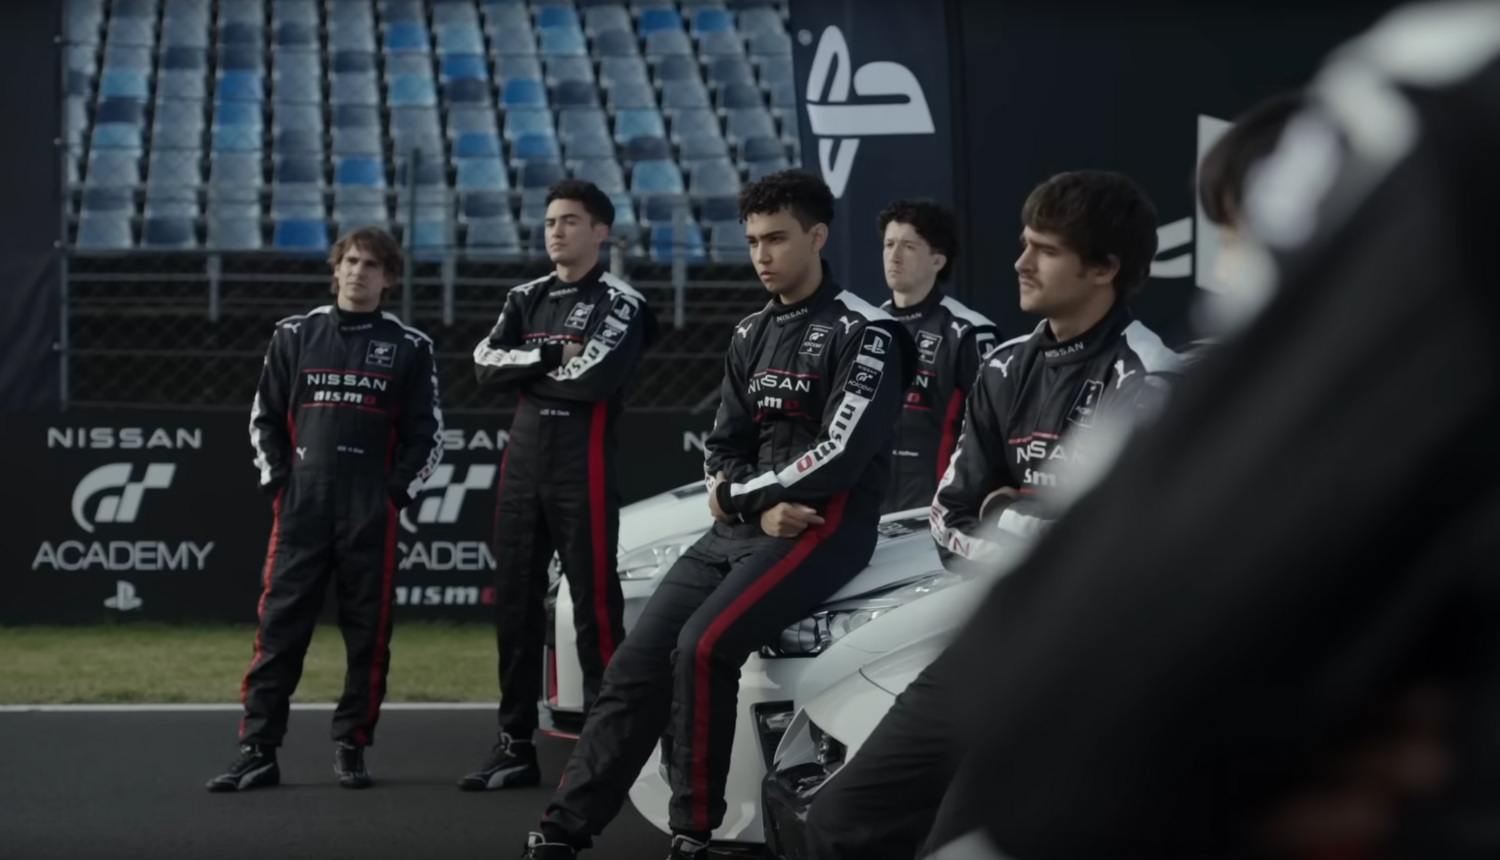 Gran Turismo film review: Showcasing a new form of motorsport star